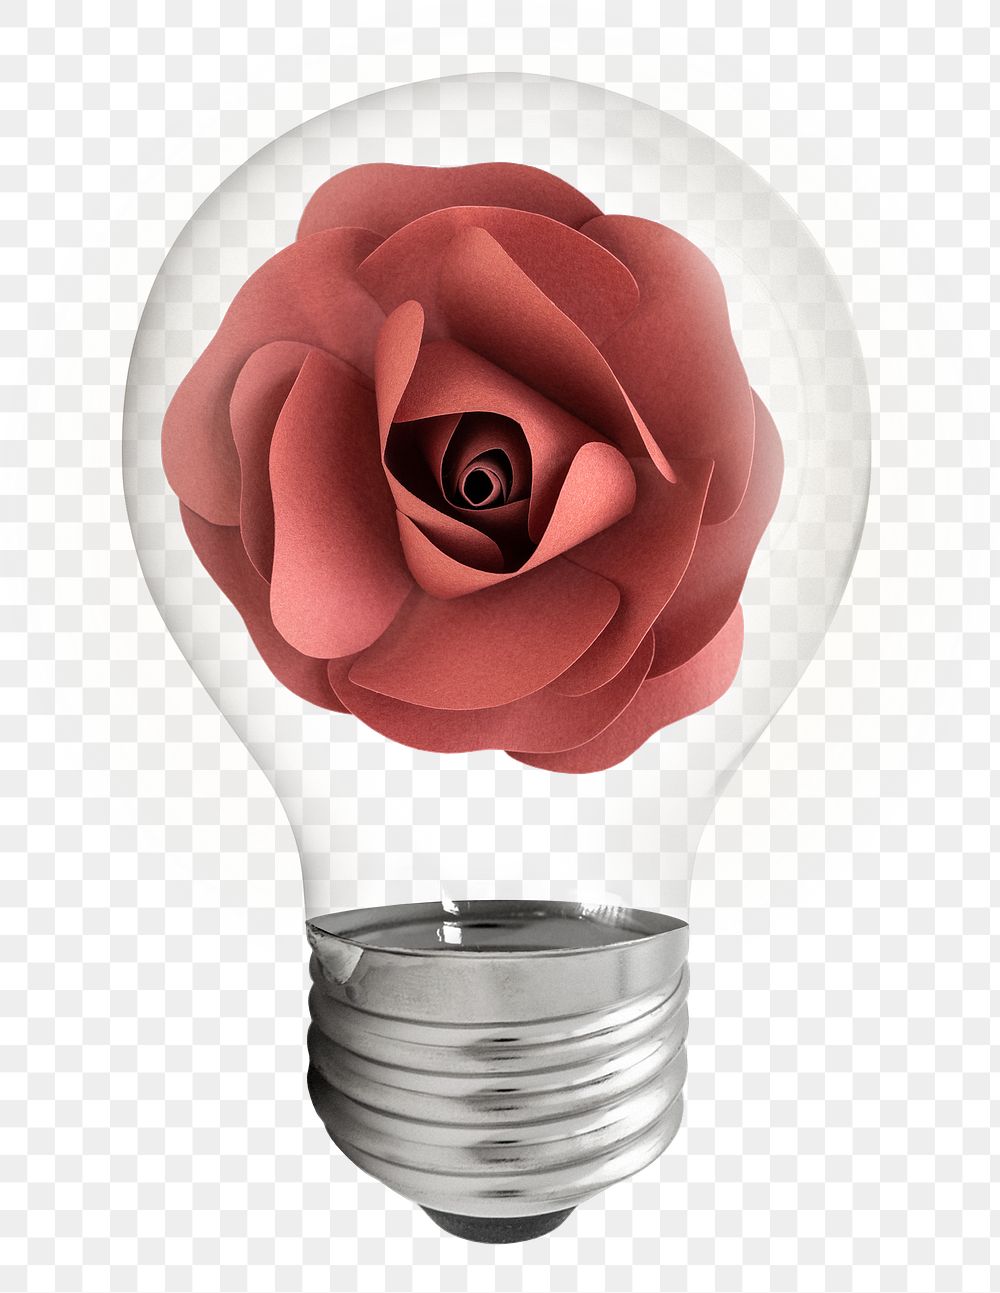 Paper rose png bulb sticker, red flower graphic on transparent background